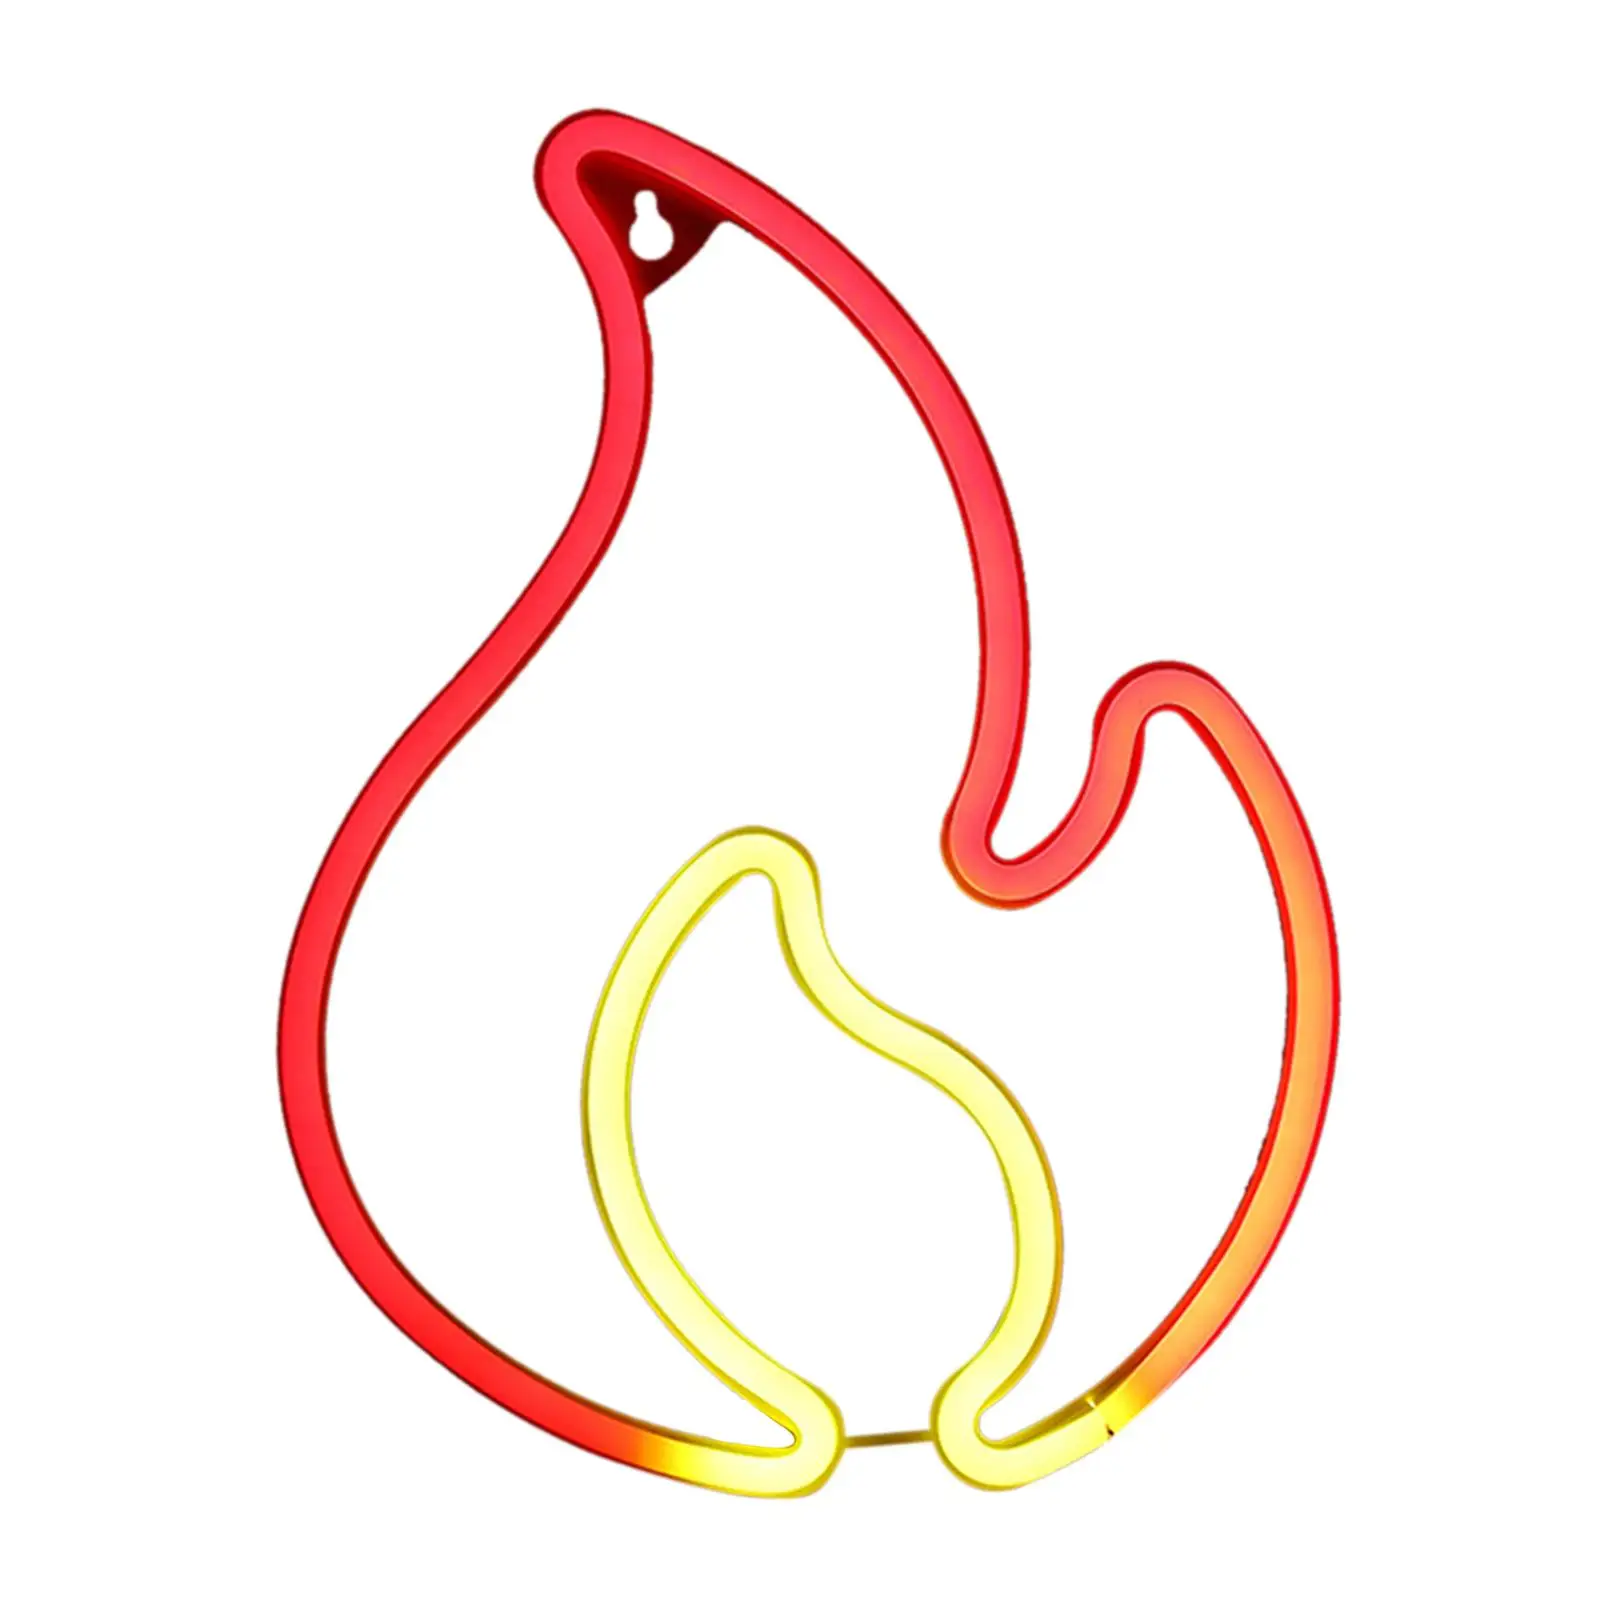 Yellow and Red Flame Neon Sign for Wall Decoration Hanging Flame Shaped Light